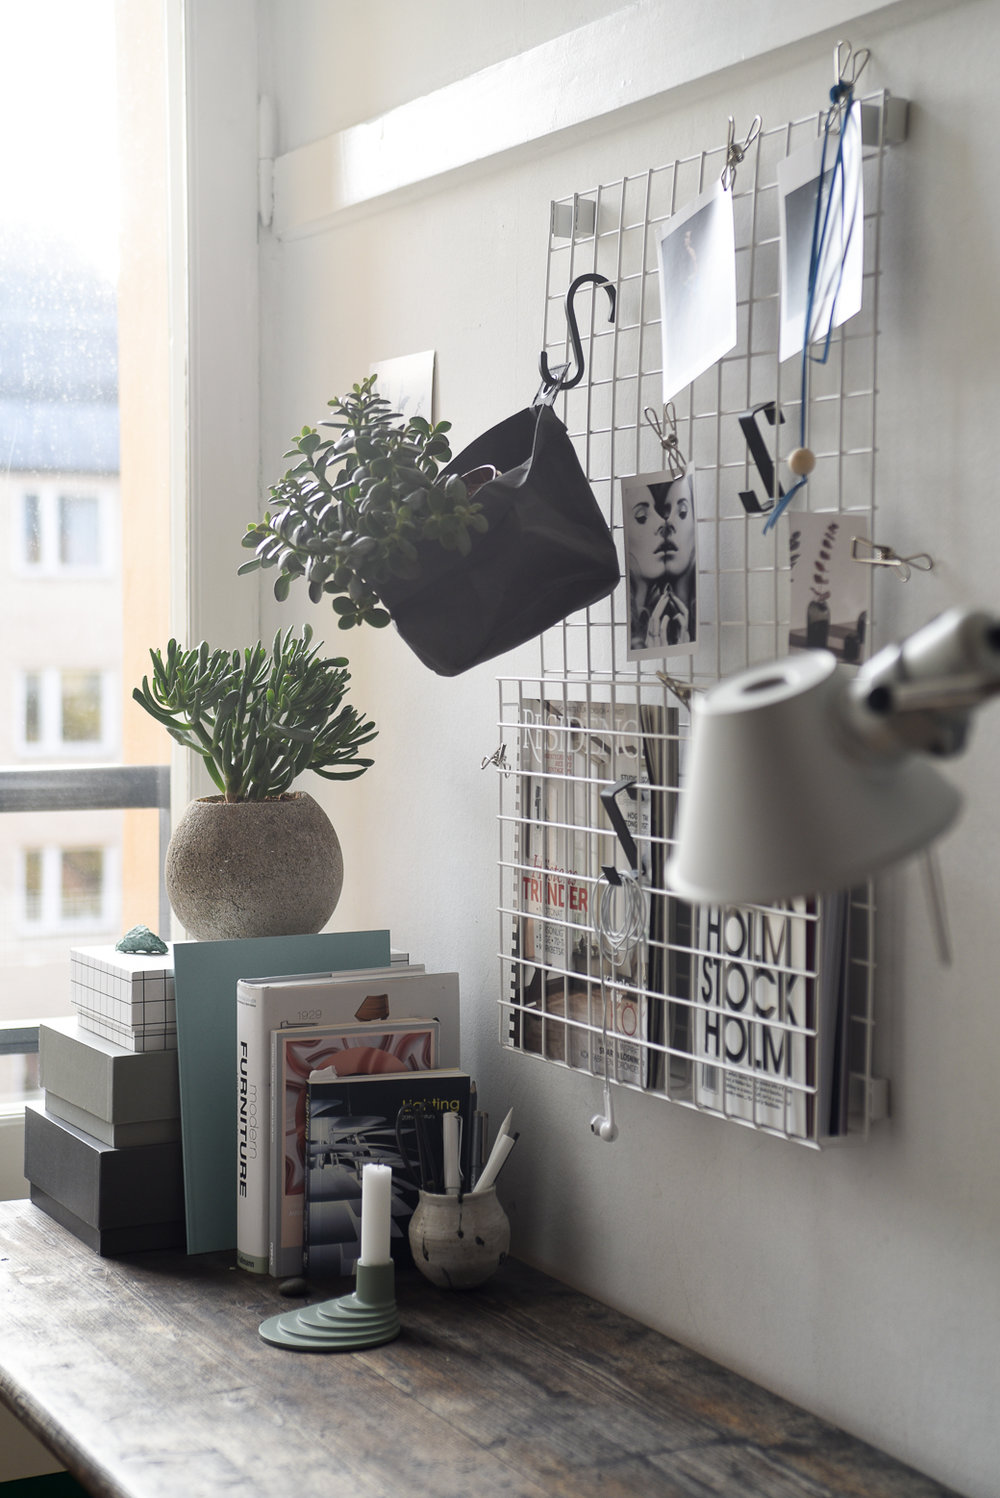 Every day Swedish Design in the home-grid storage + ypperlig candle holder.jpg